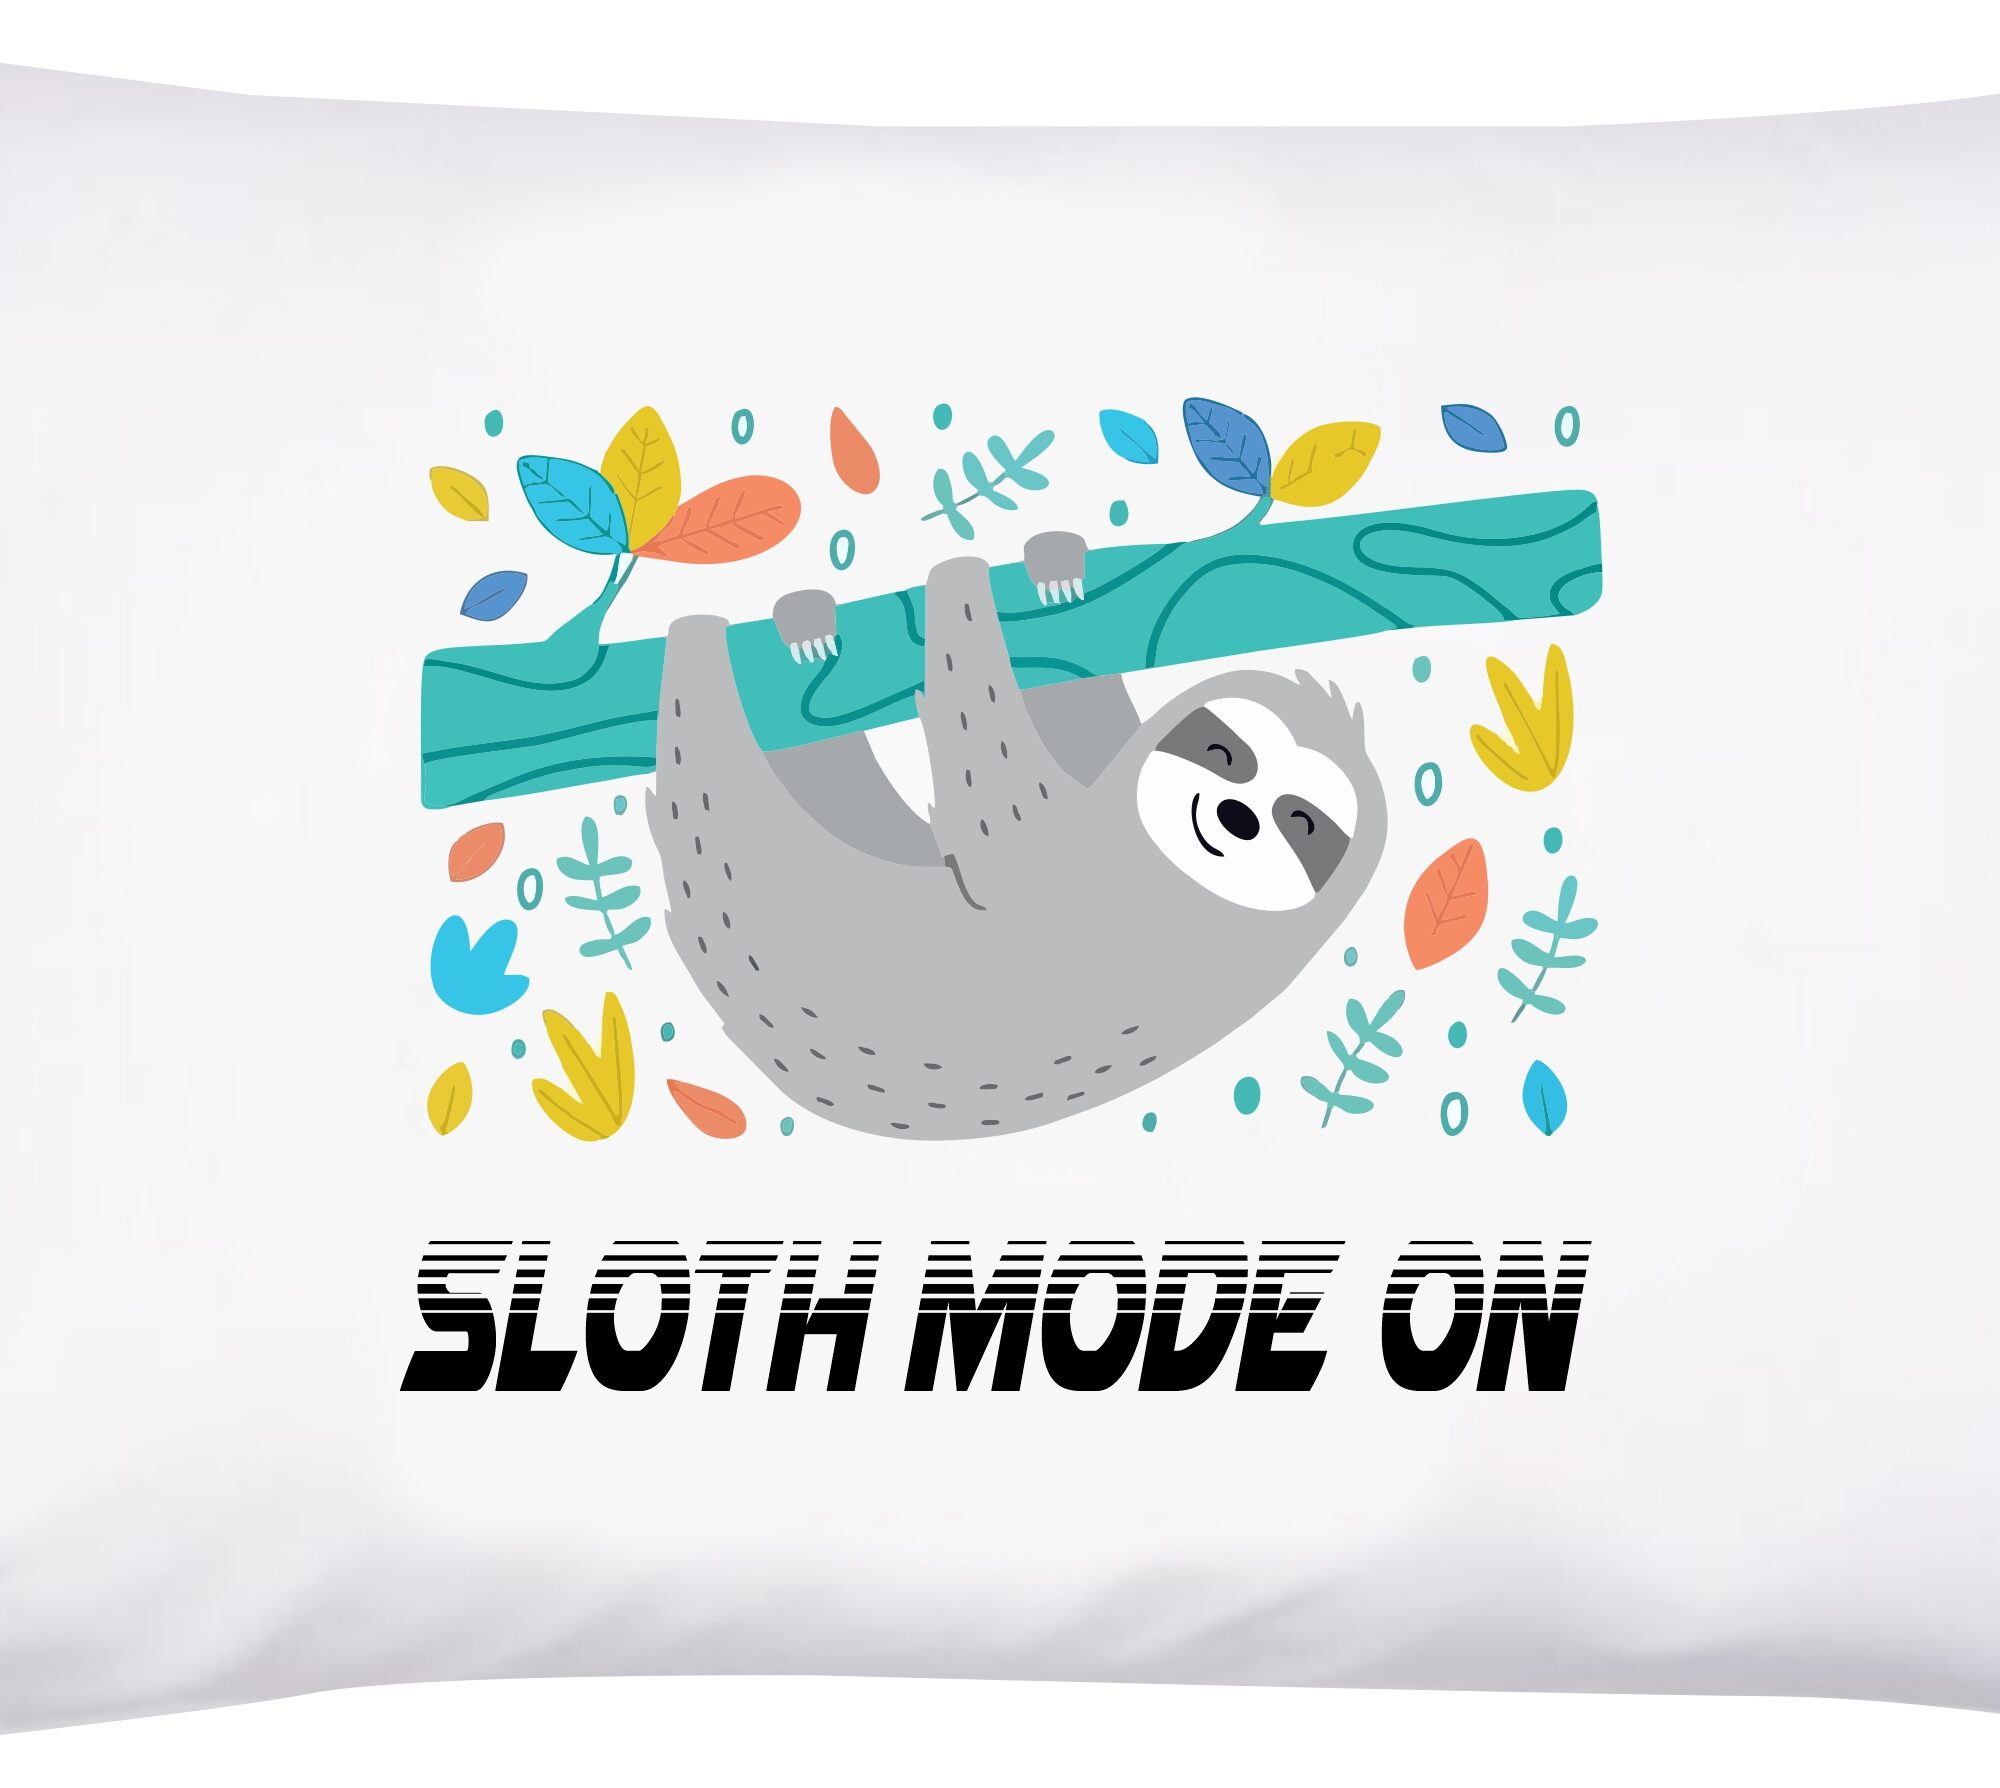 Pikkaboo Pillowcase Cover for Kids - Sloth